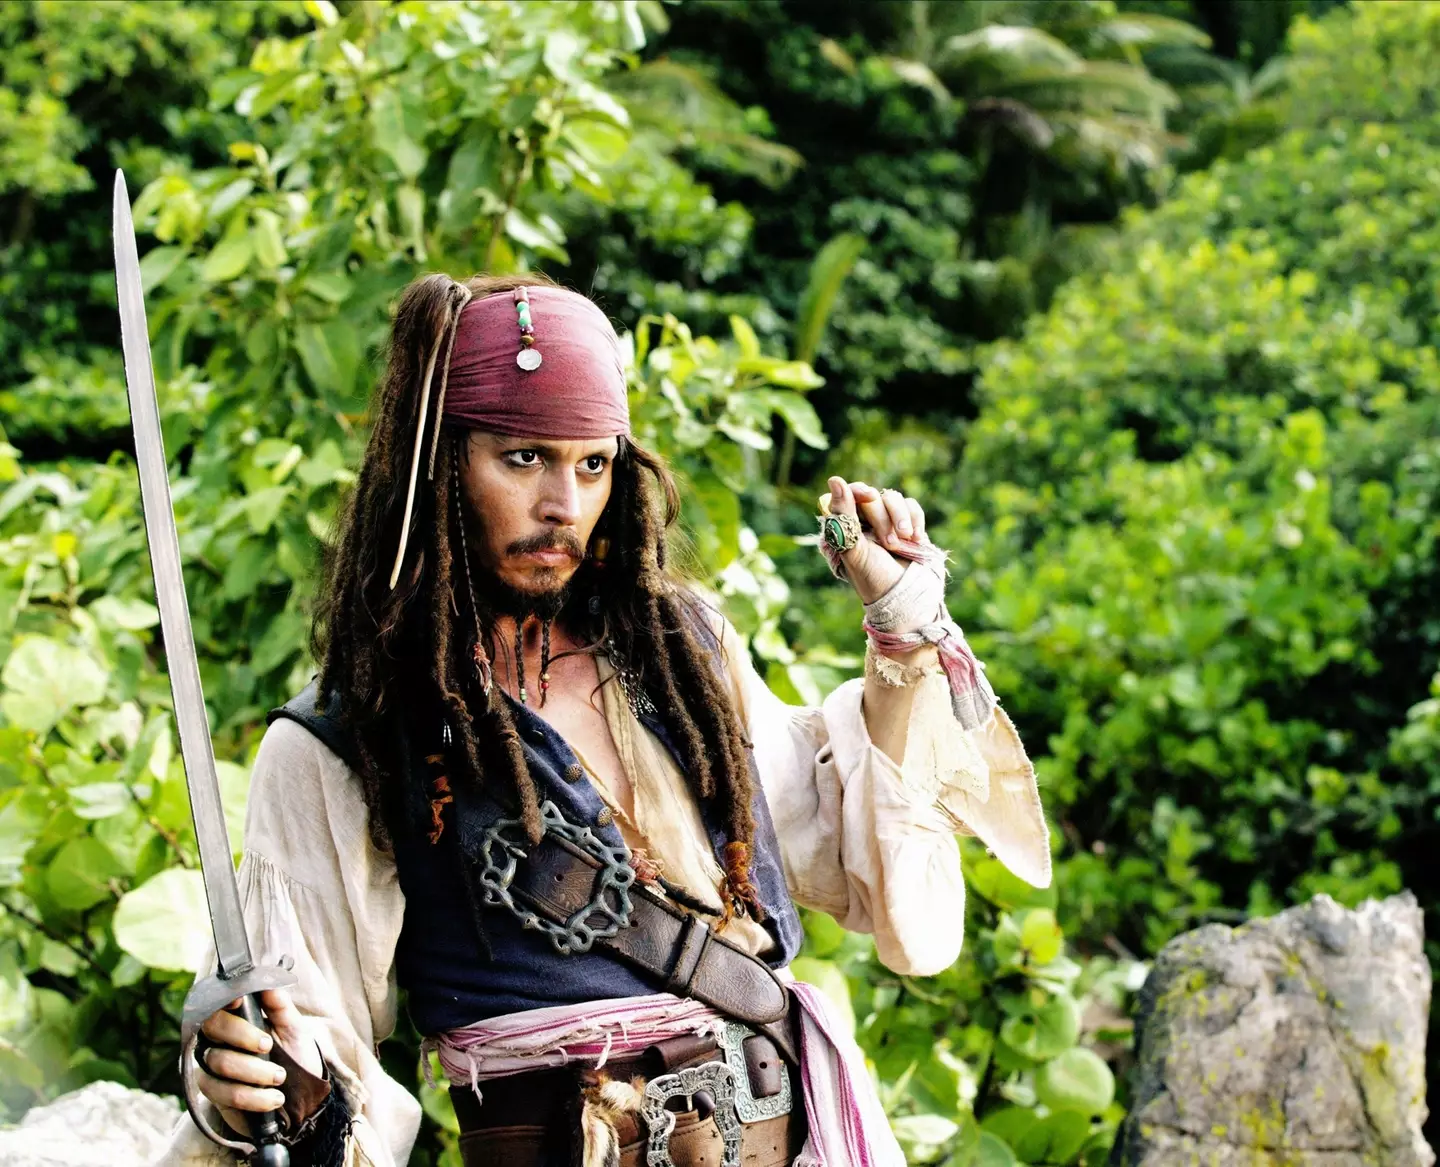 Johnny Depp appeared as Captain Jack Sparrow in several Pirates of the Caribbean movies.